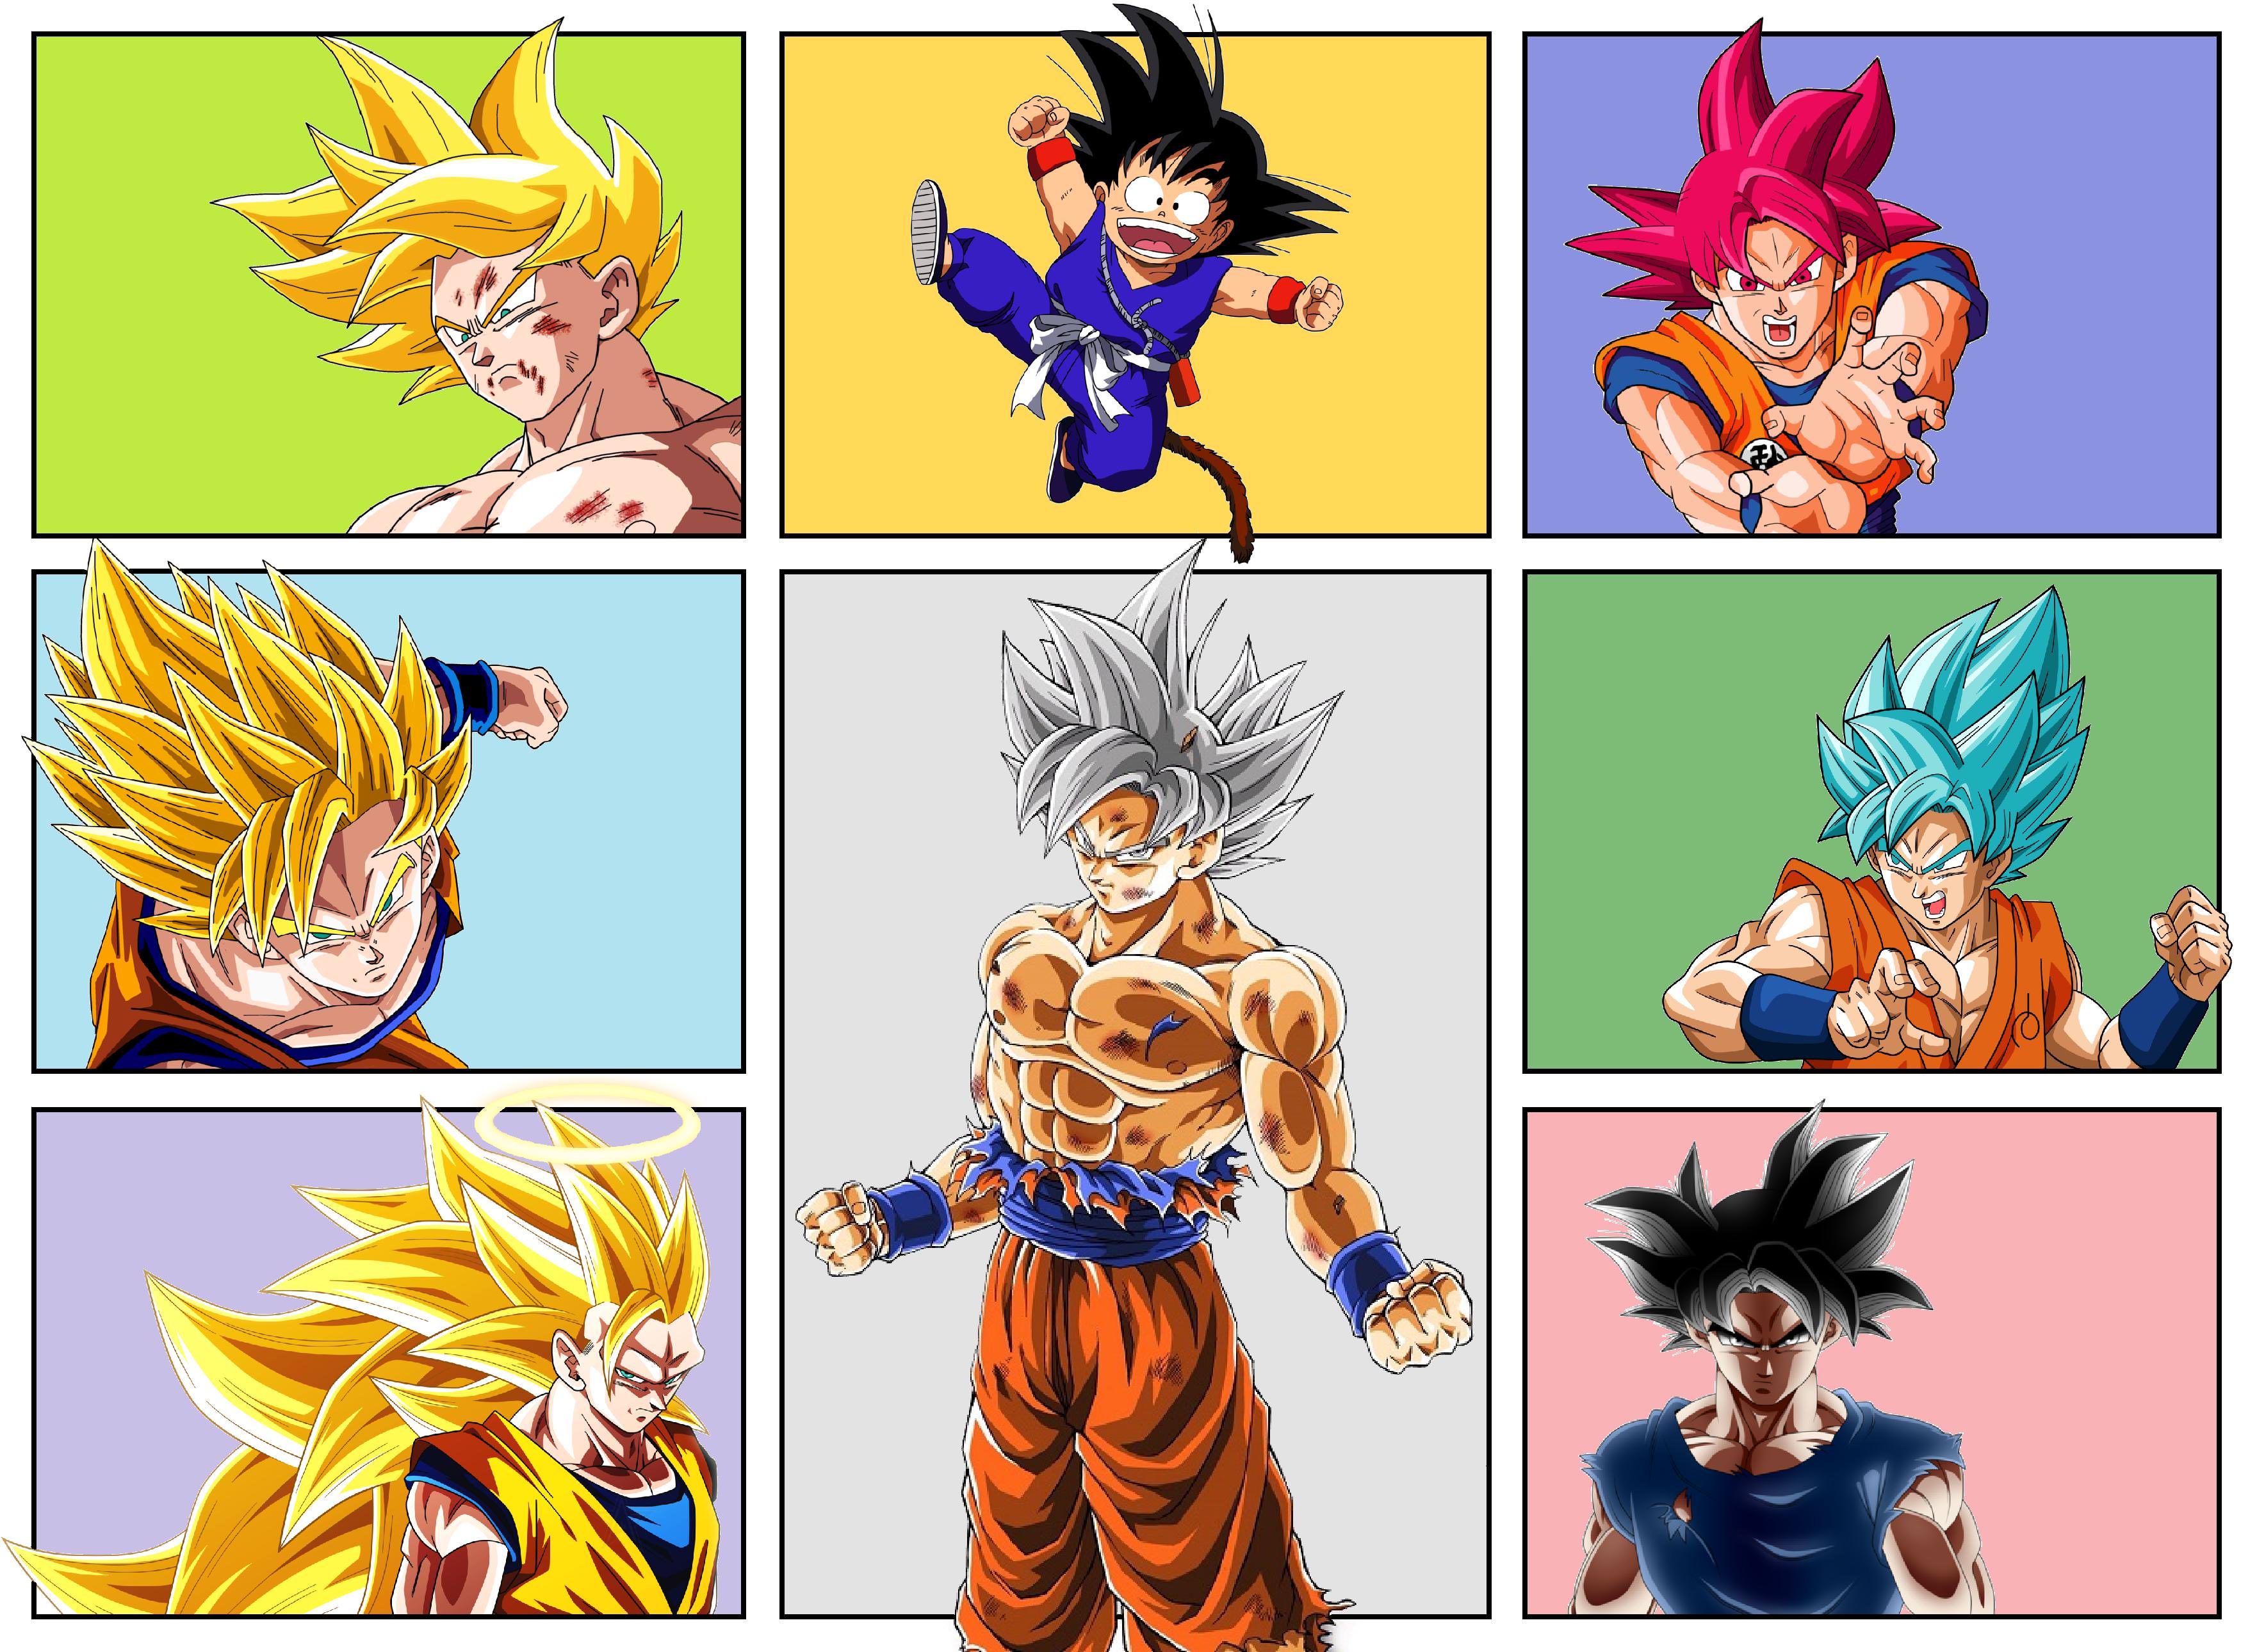 OC evolution of Son Goku (image sources in comments): dbz